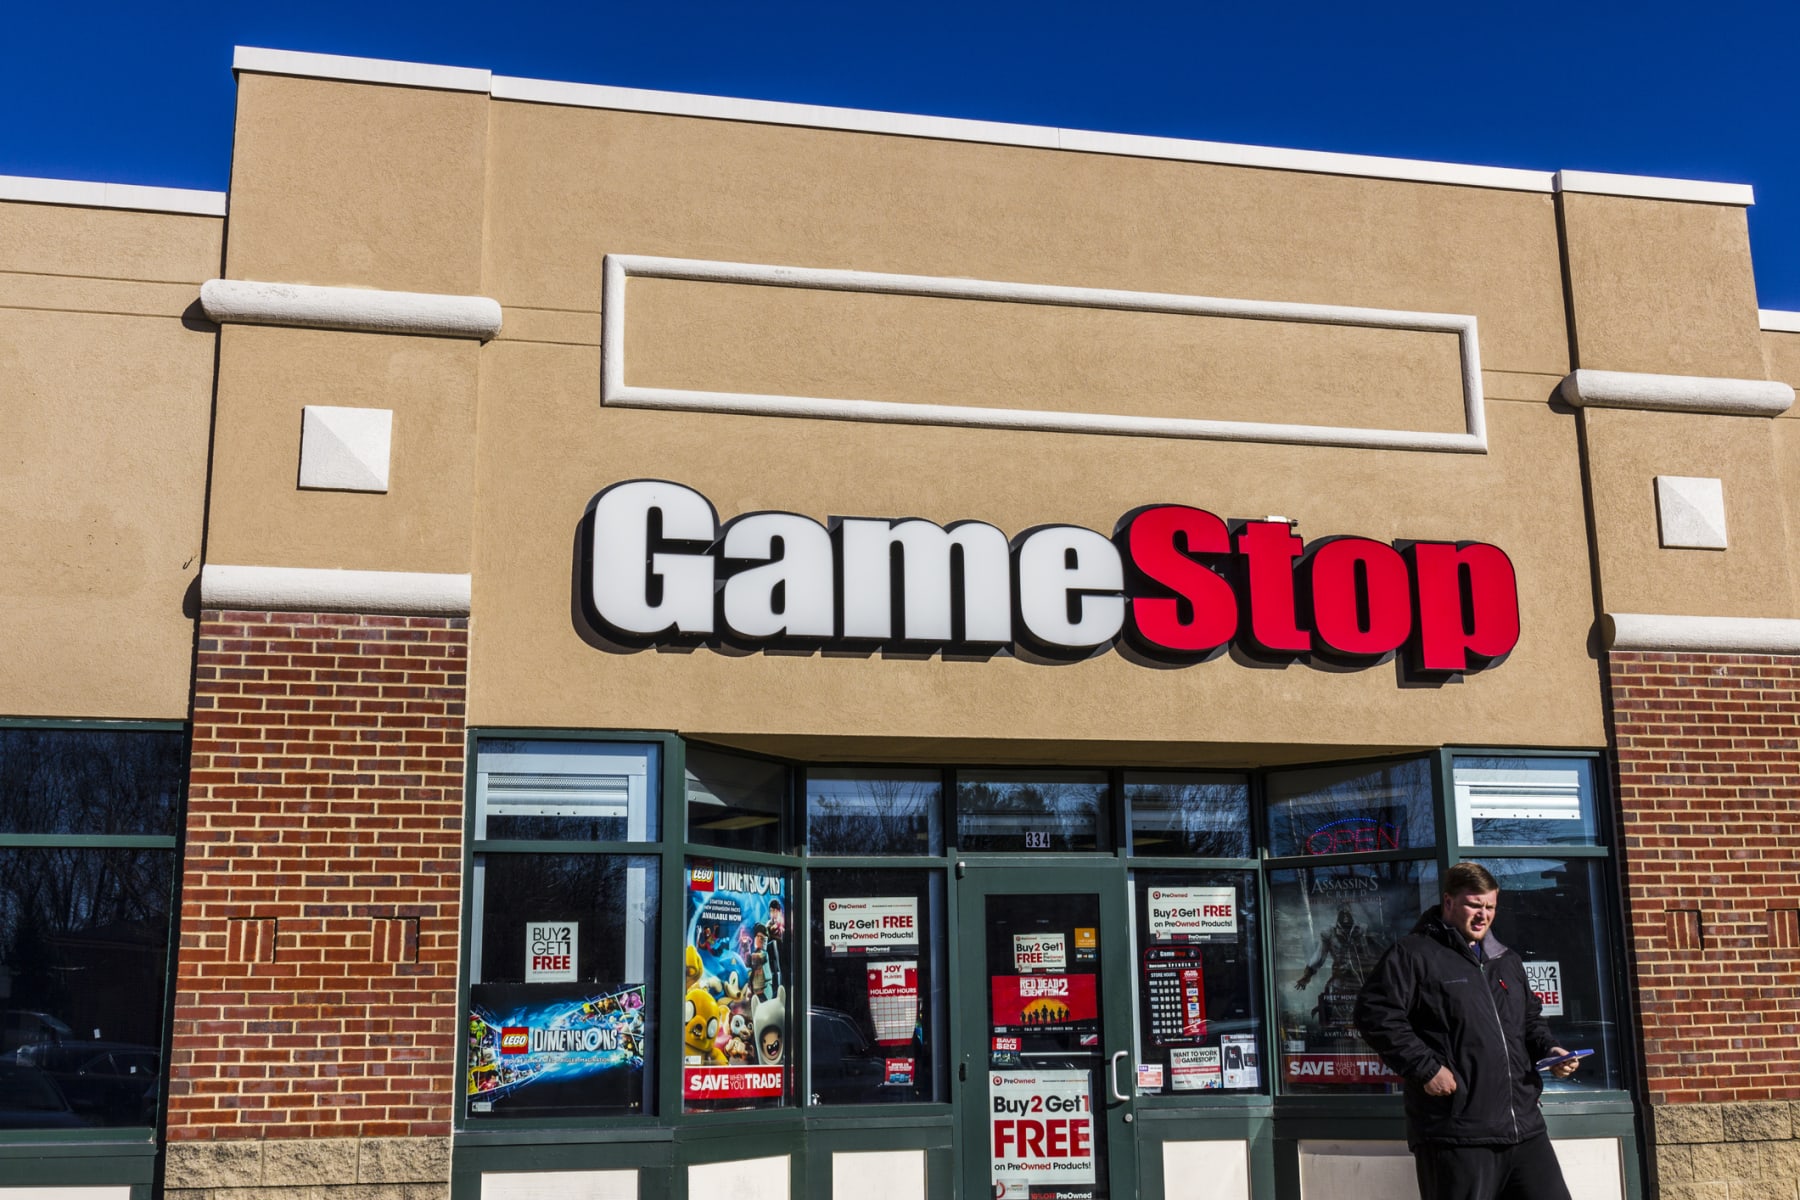 A GameStop entrance in the daytime